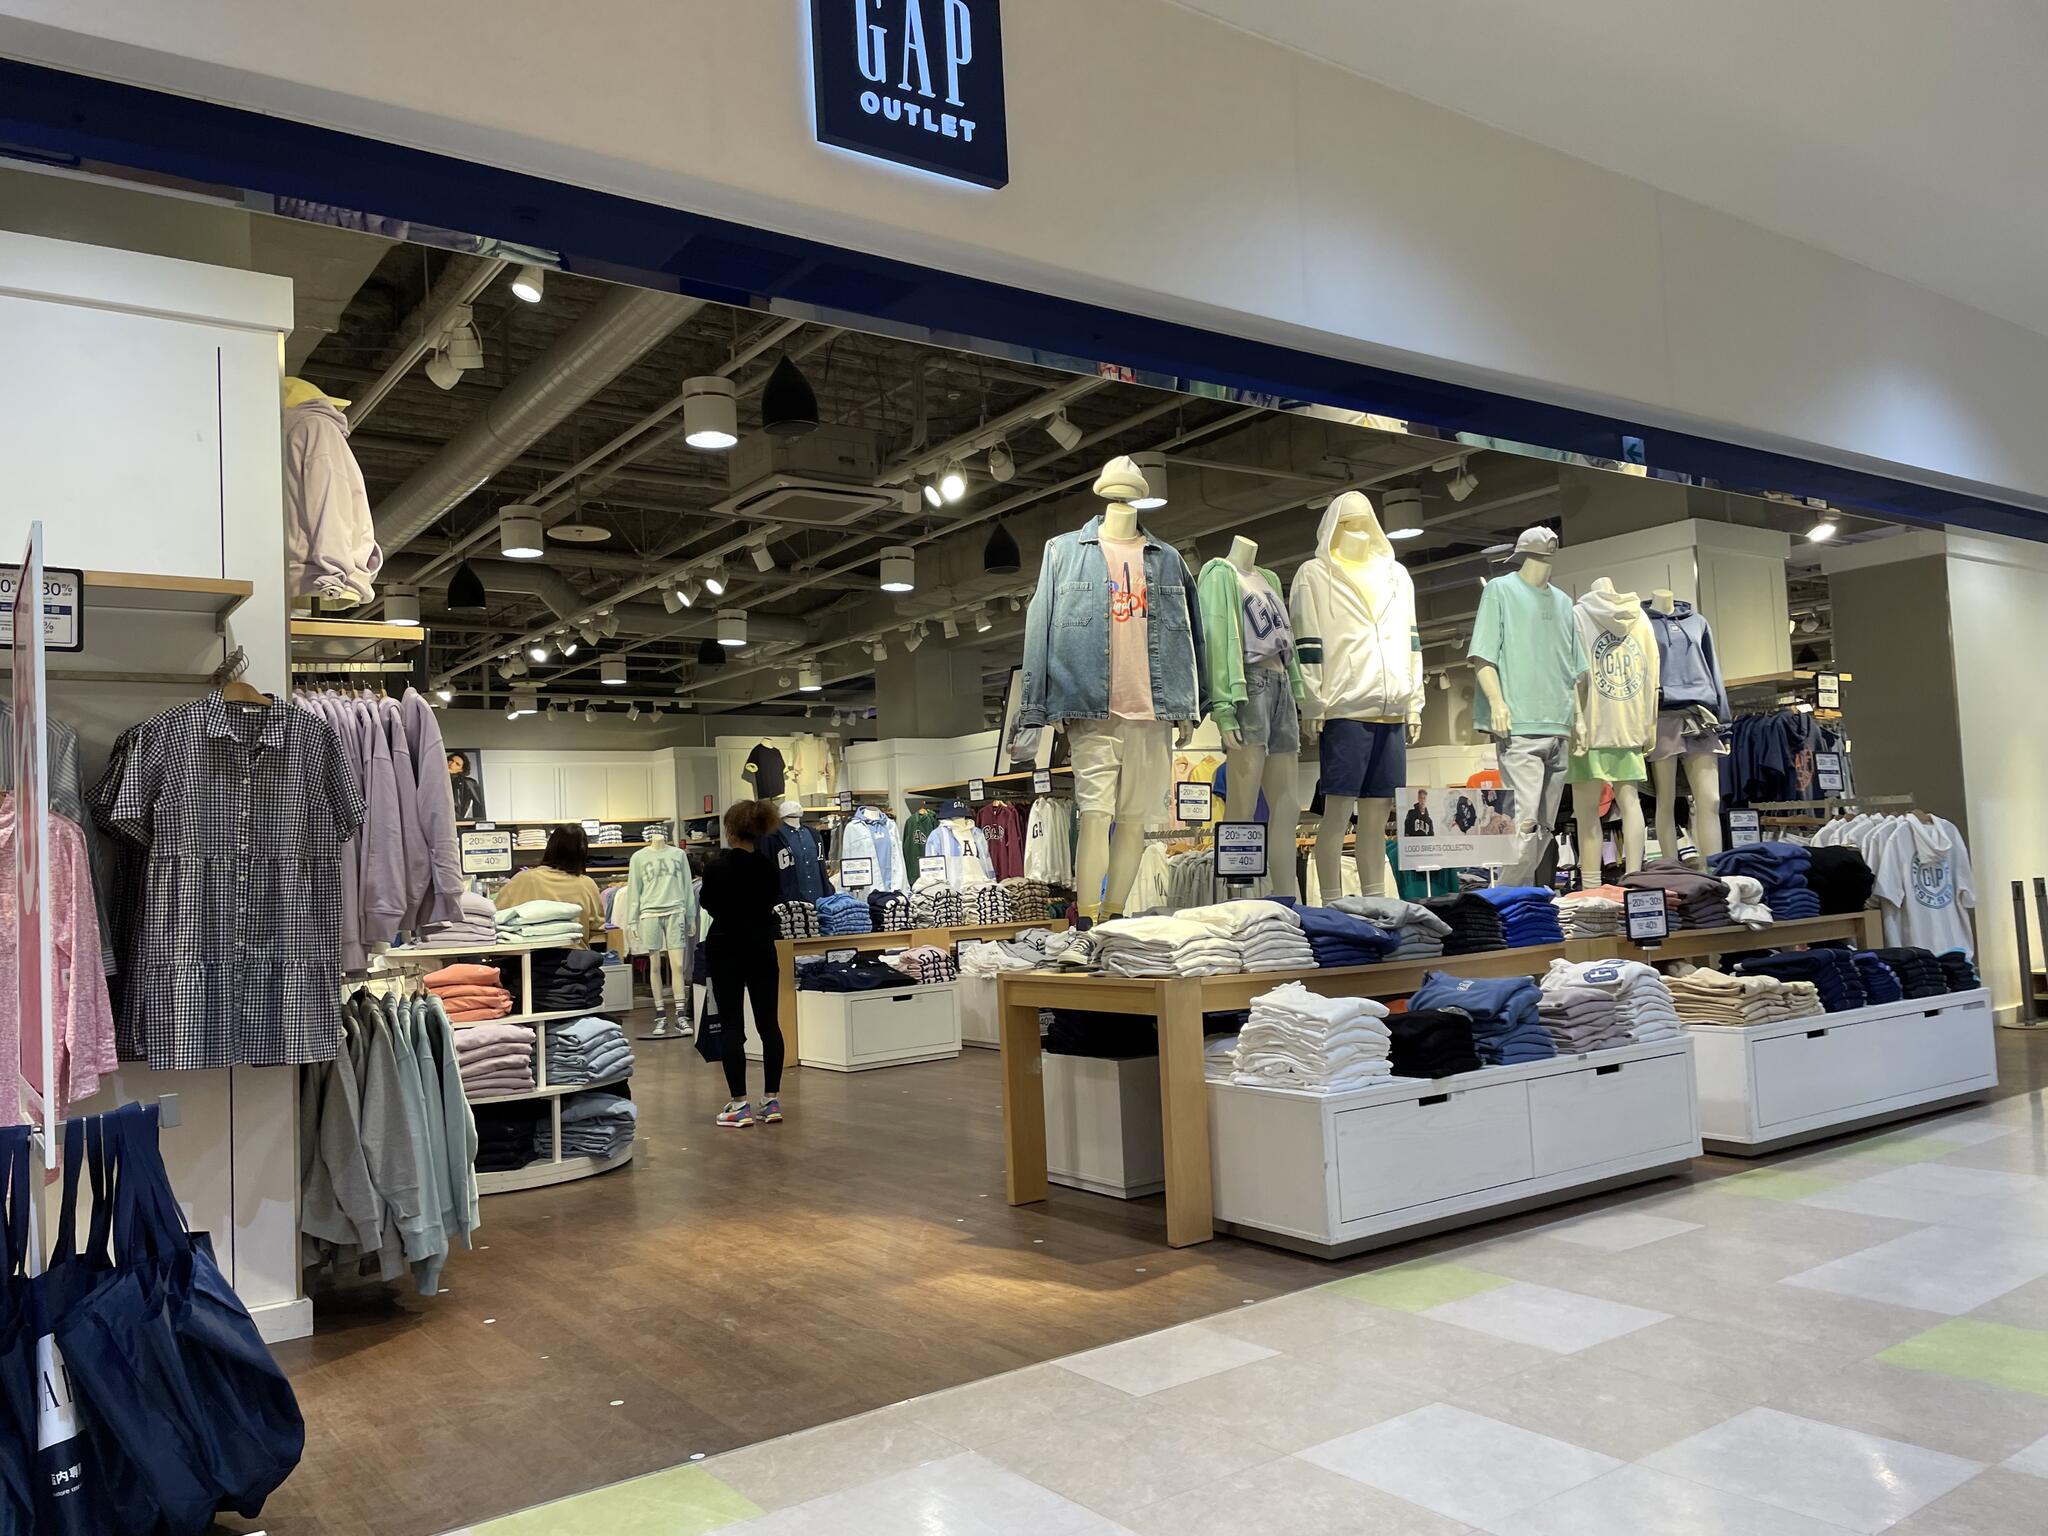 GAP Outlet 島忠ホームズ草加舎人店の代表写真2